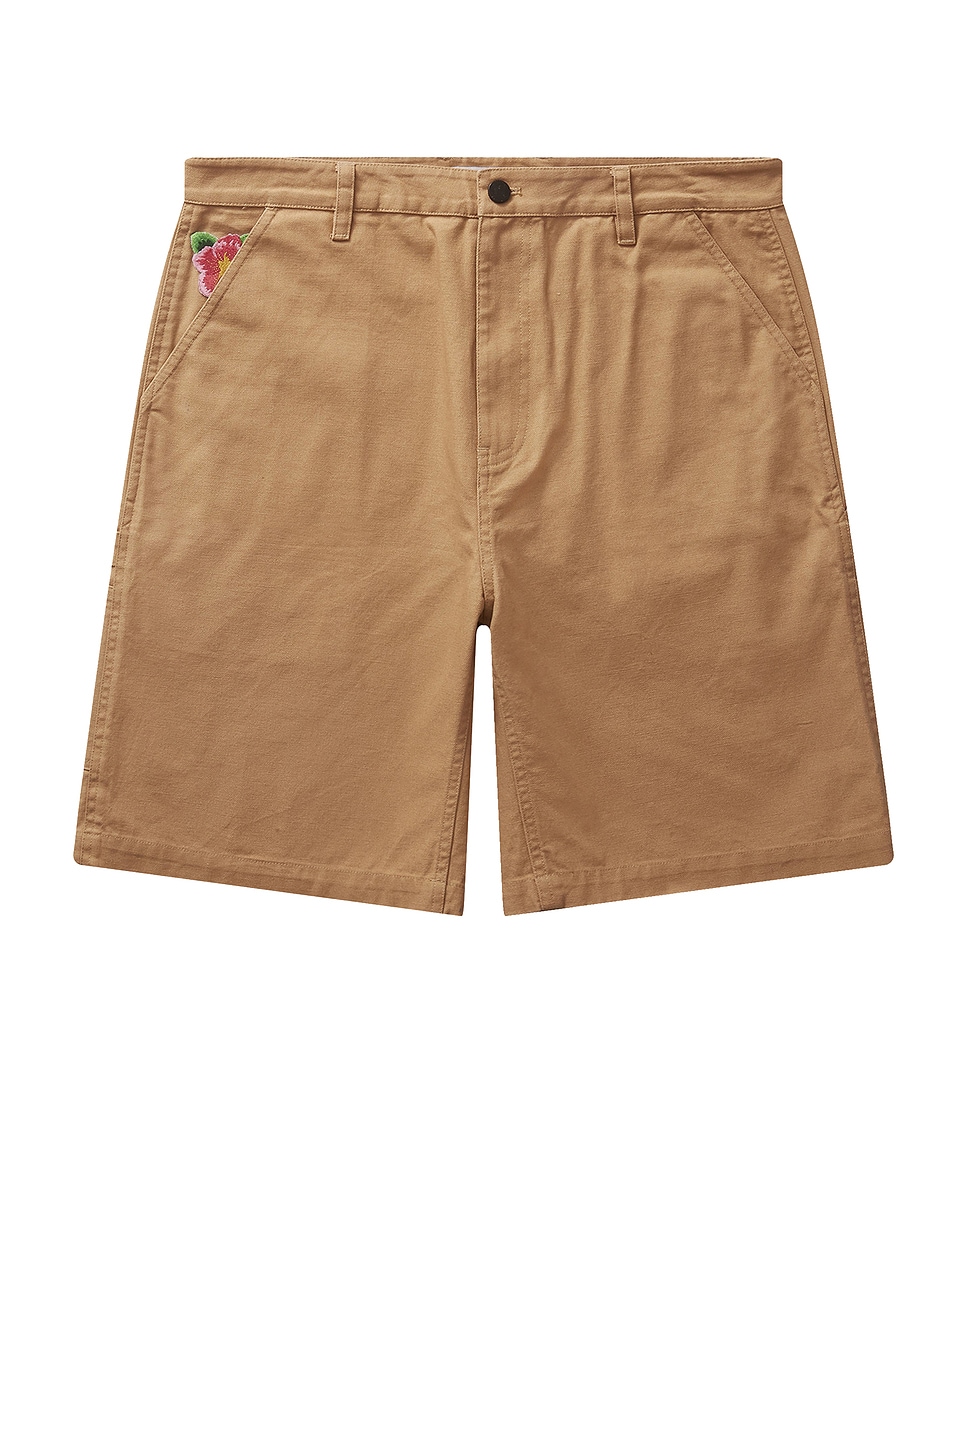 Image 1 of Wahine Cargo Shorts in Camel